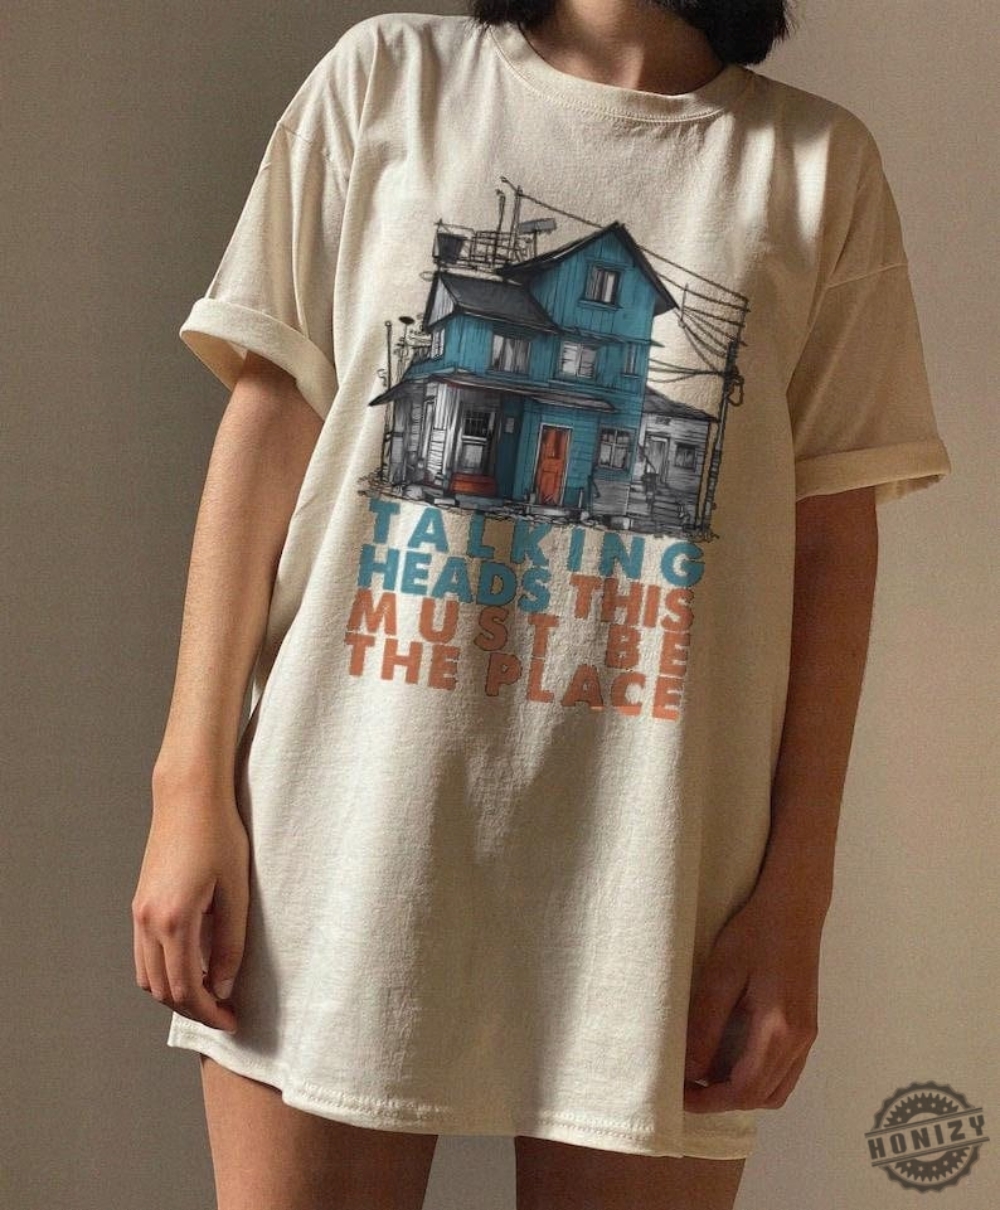 Talking Head This Must Be The Place Shirt